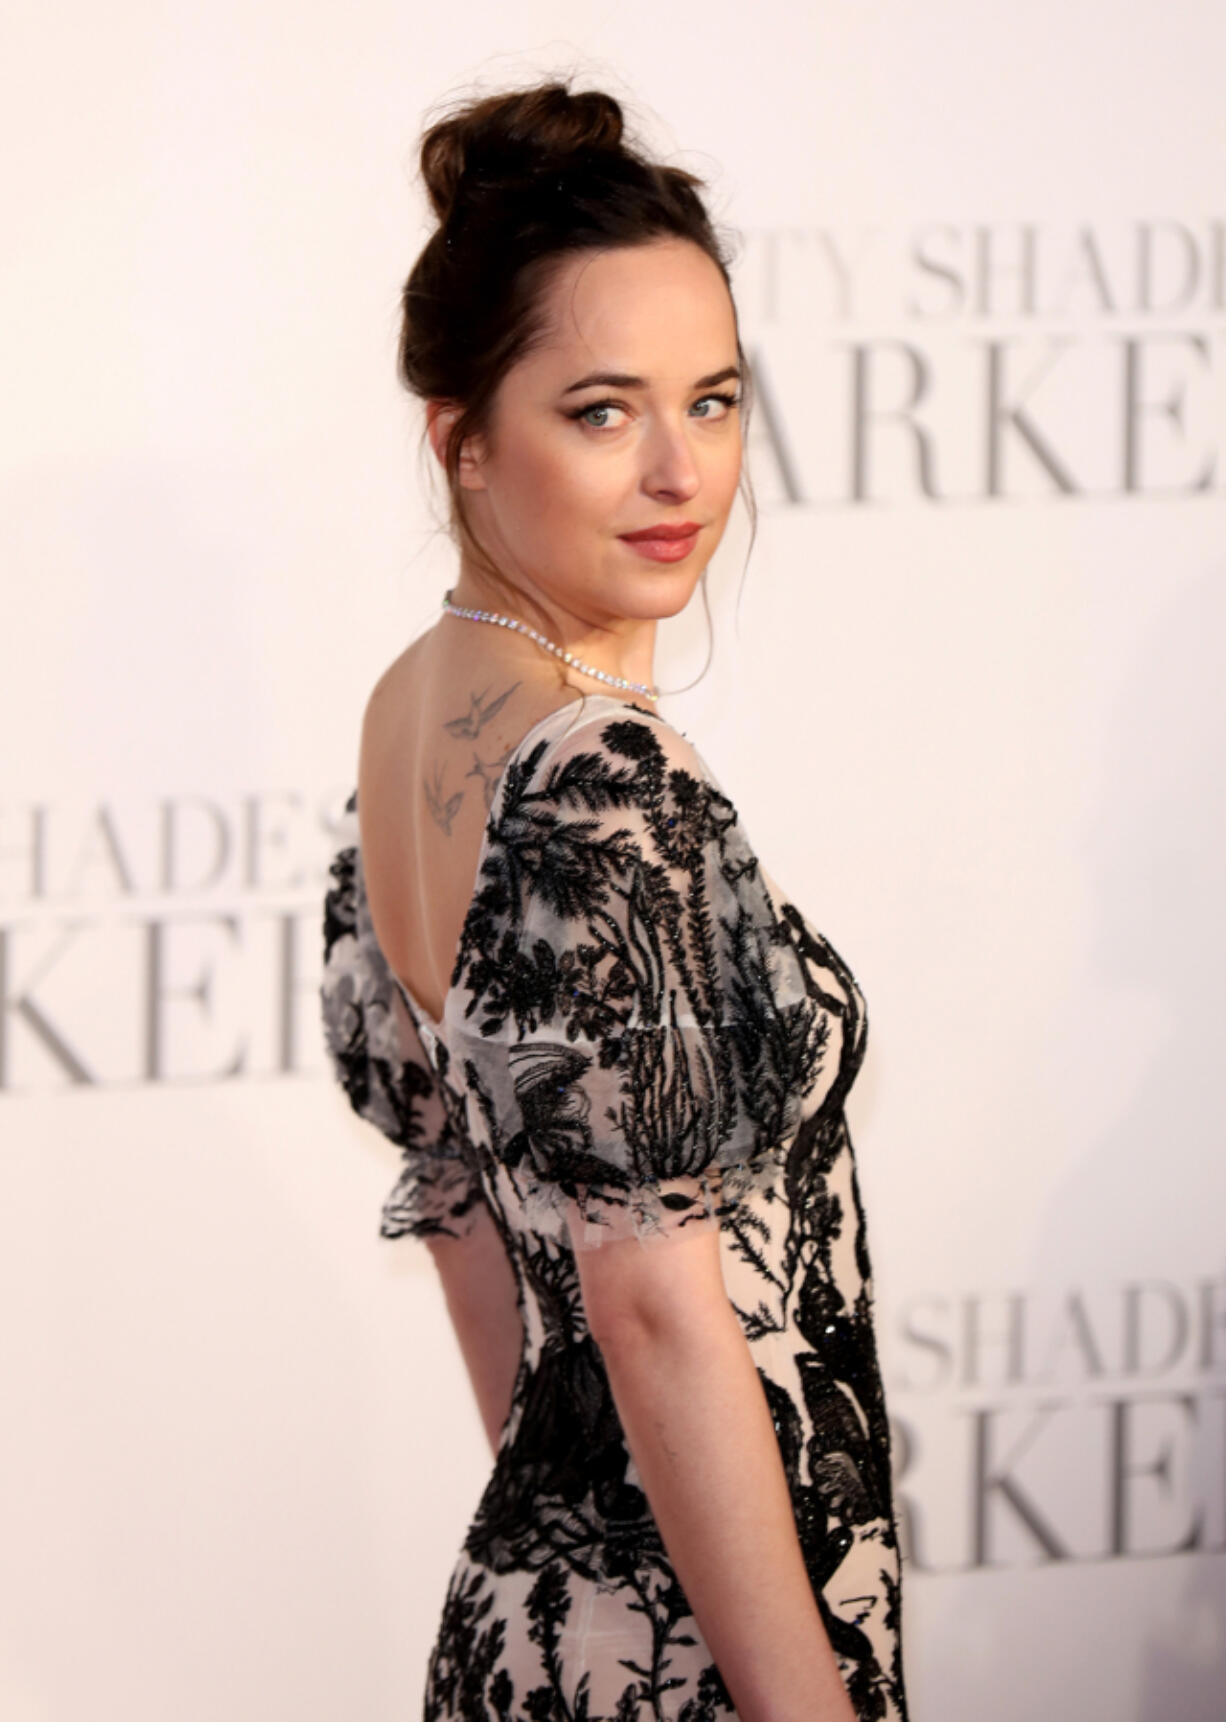 Dakota Johnson attends the U.K. premiere of &ldquo;Fifty Shades Darker&rdquo; at the Odeon Leicester Square on Feb. 9, 2017, in London. (Tim P.